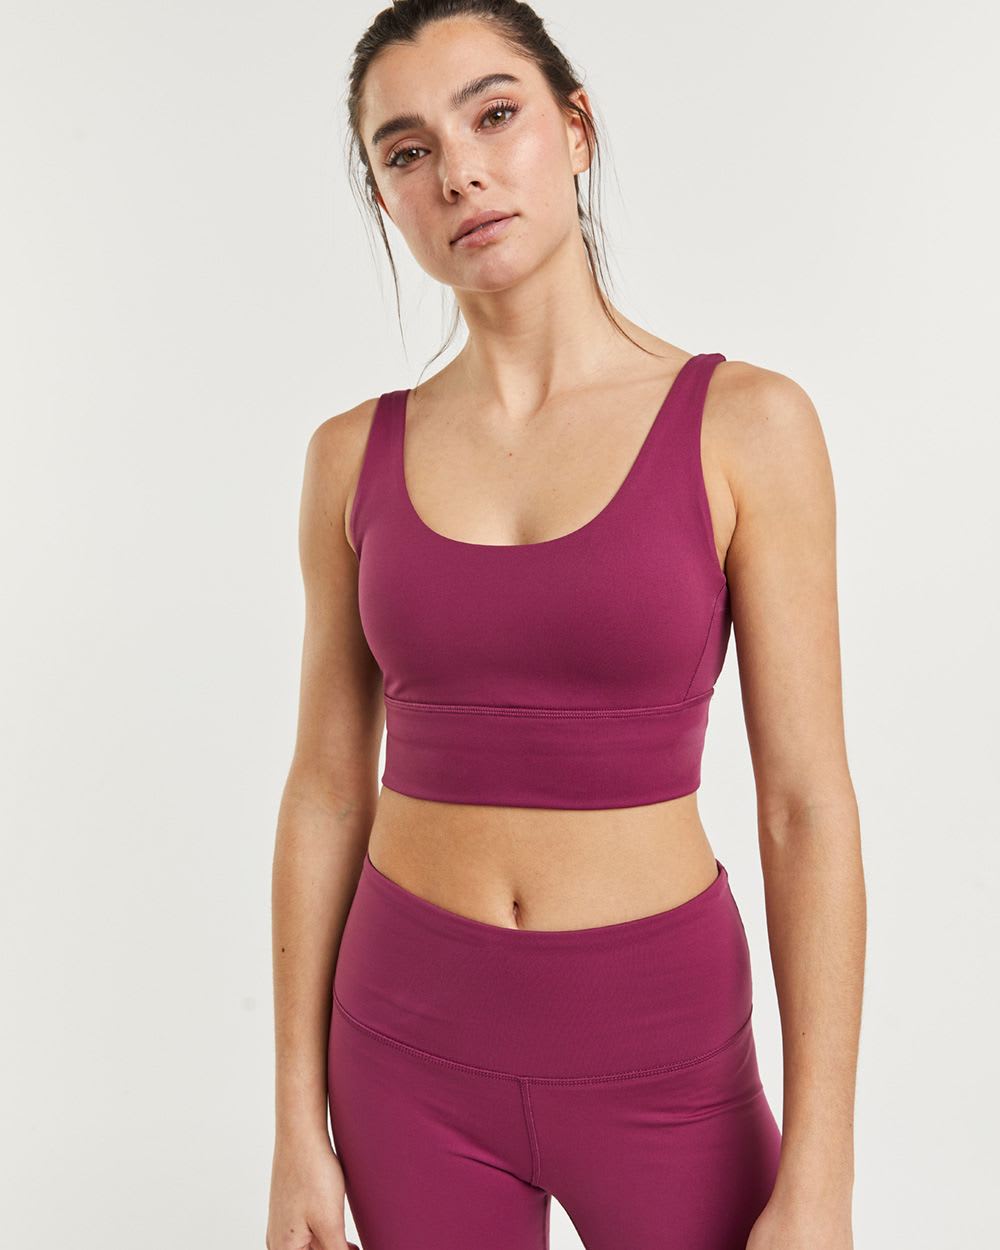 Recycled Polyester Scoop Neck Sports Bra Pulse Hyba